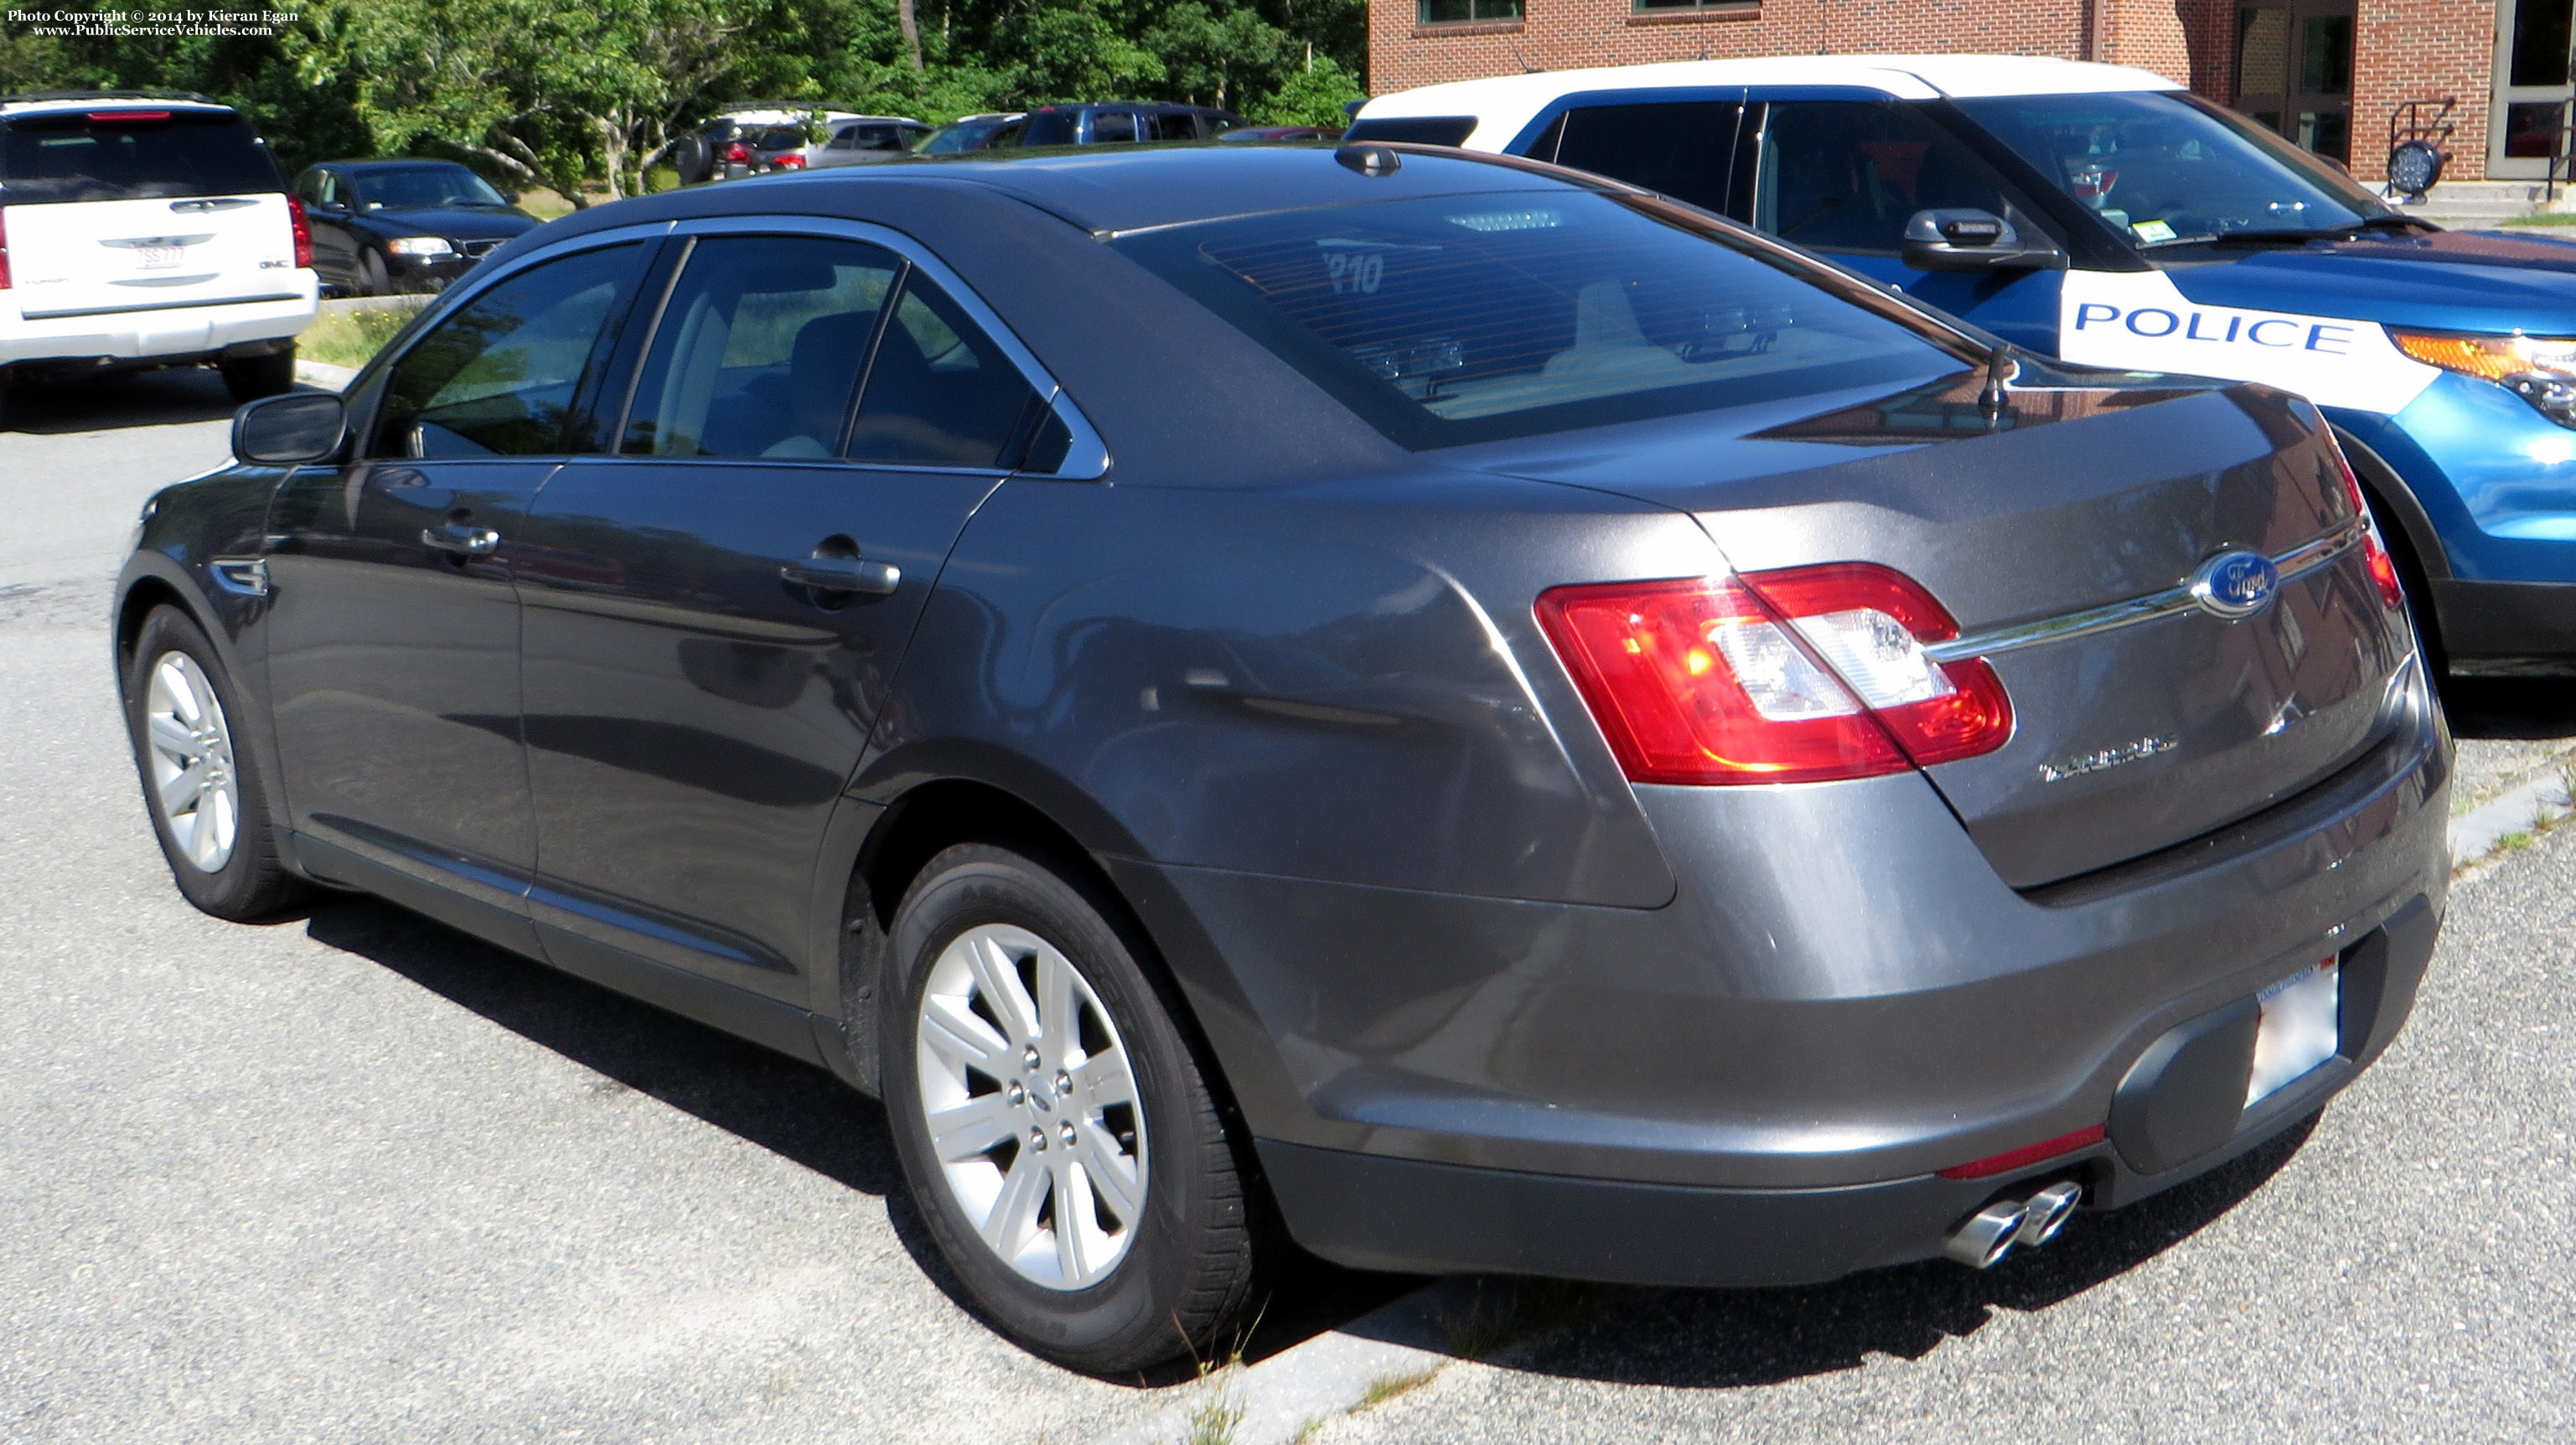 A photo  of Barnstable Police
            Unmarked Unit, a 2011-2014 Ford Taurus             taken by Kieran Egan